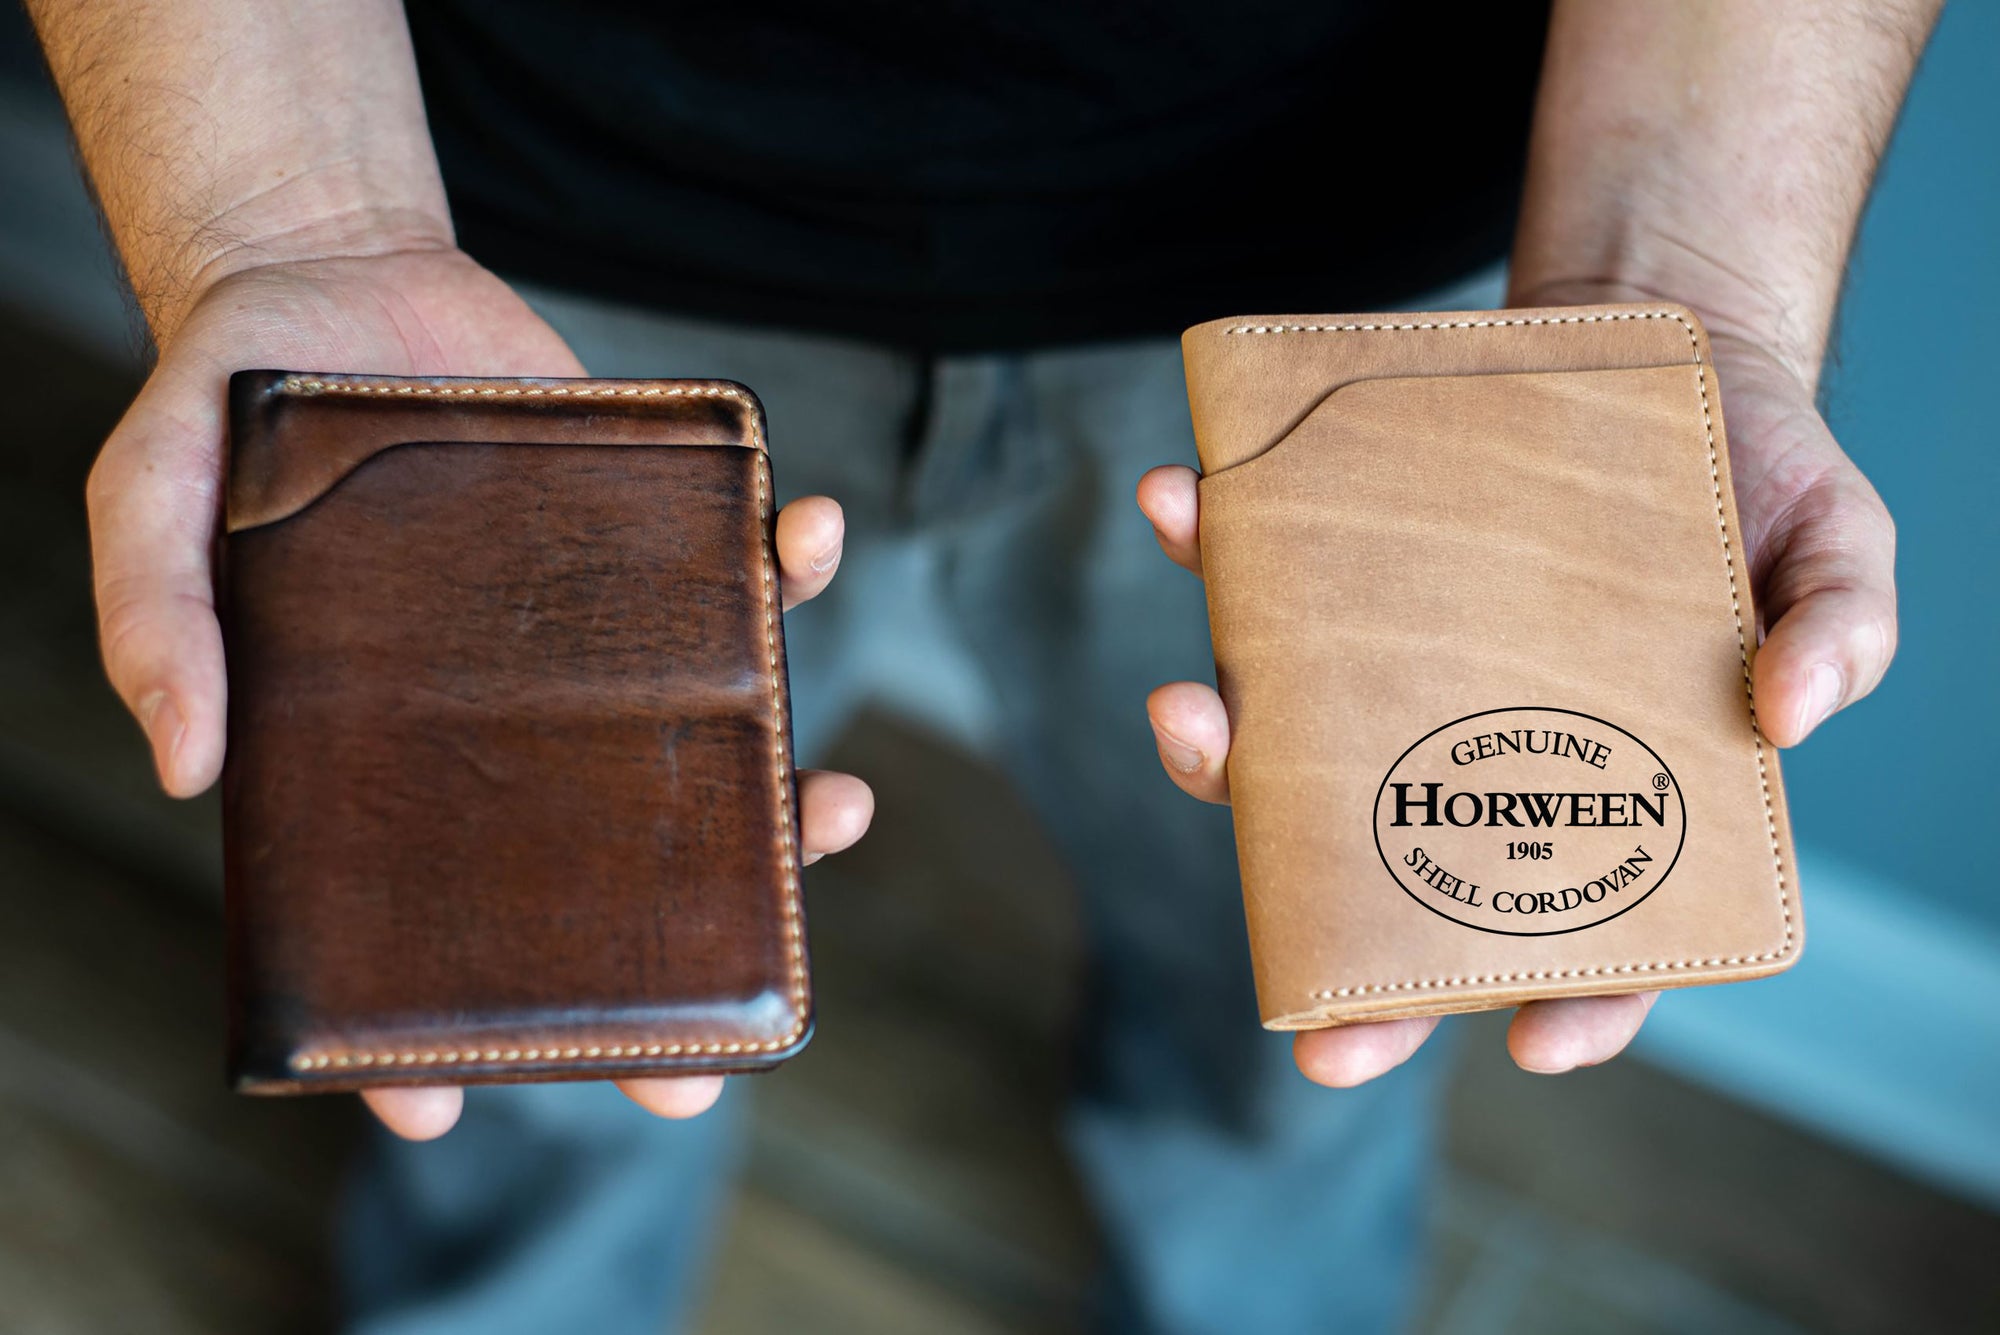 Shell Cordovan Vs. Horween Chromexcel - What's the Difference?